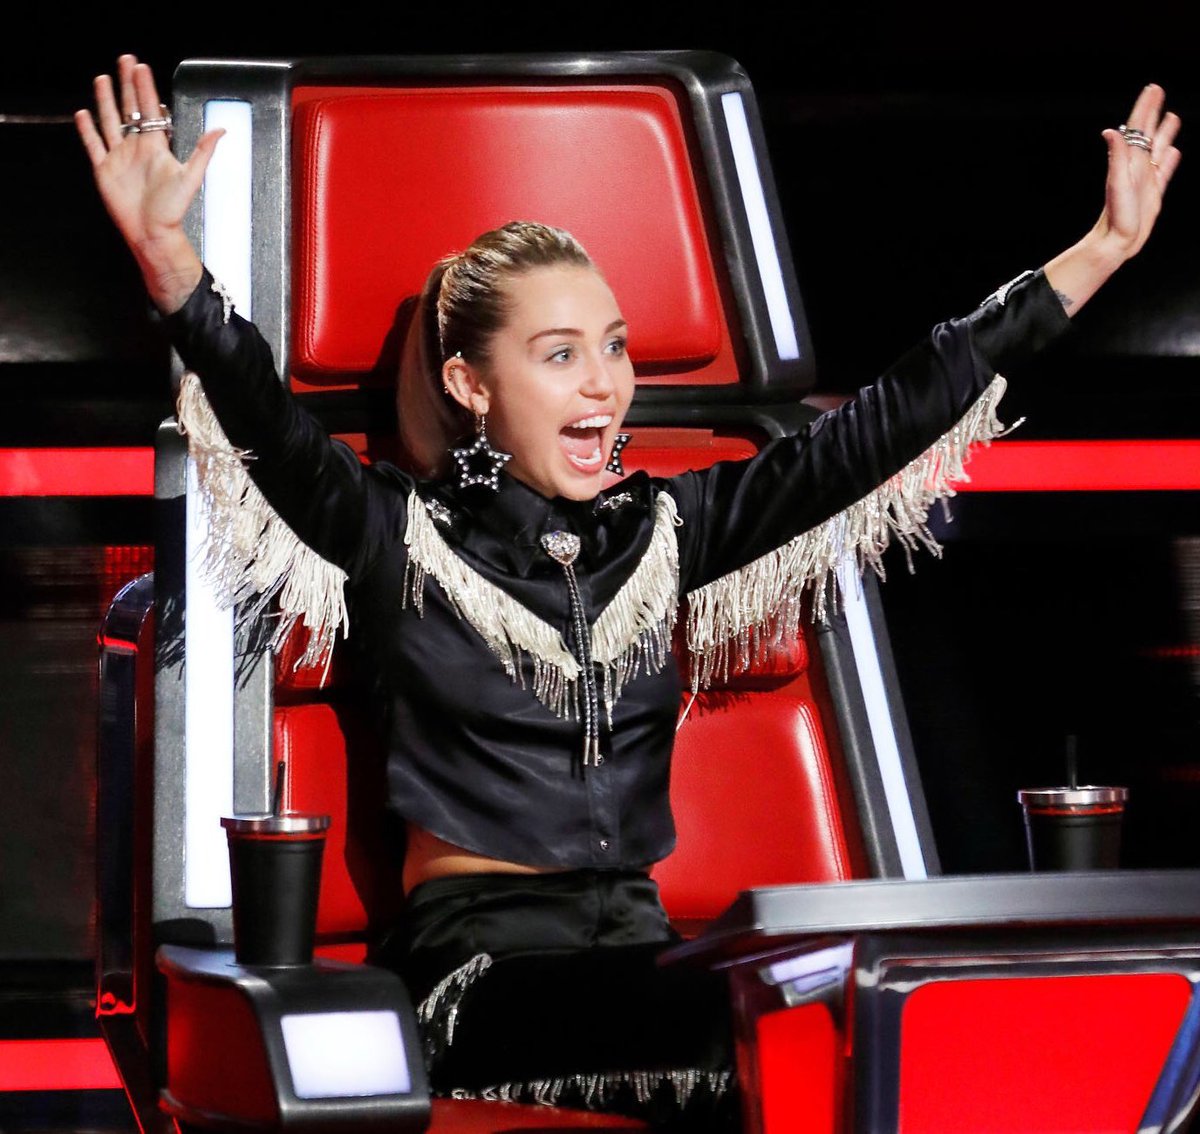 When you remember @nbcthevoice is on tonight and tomorrow! ❤️ #TeamMiley https://t.co/36CgVFhgqs